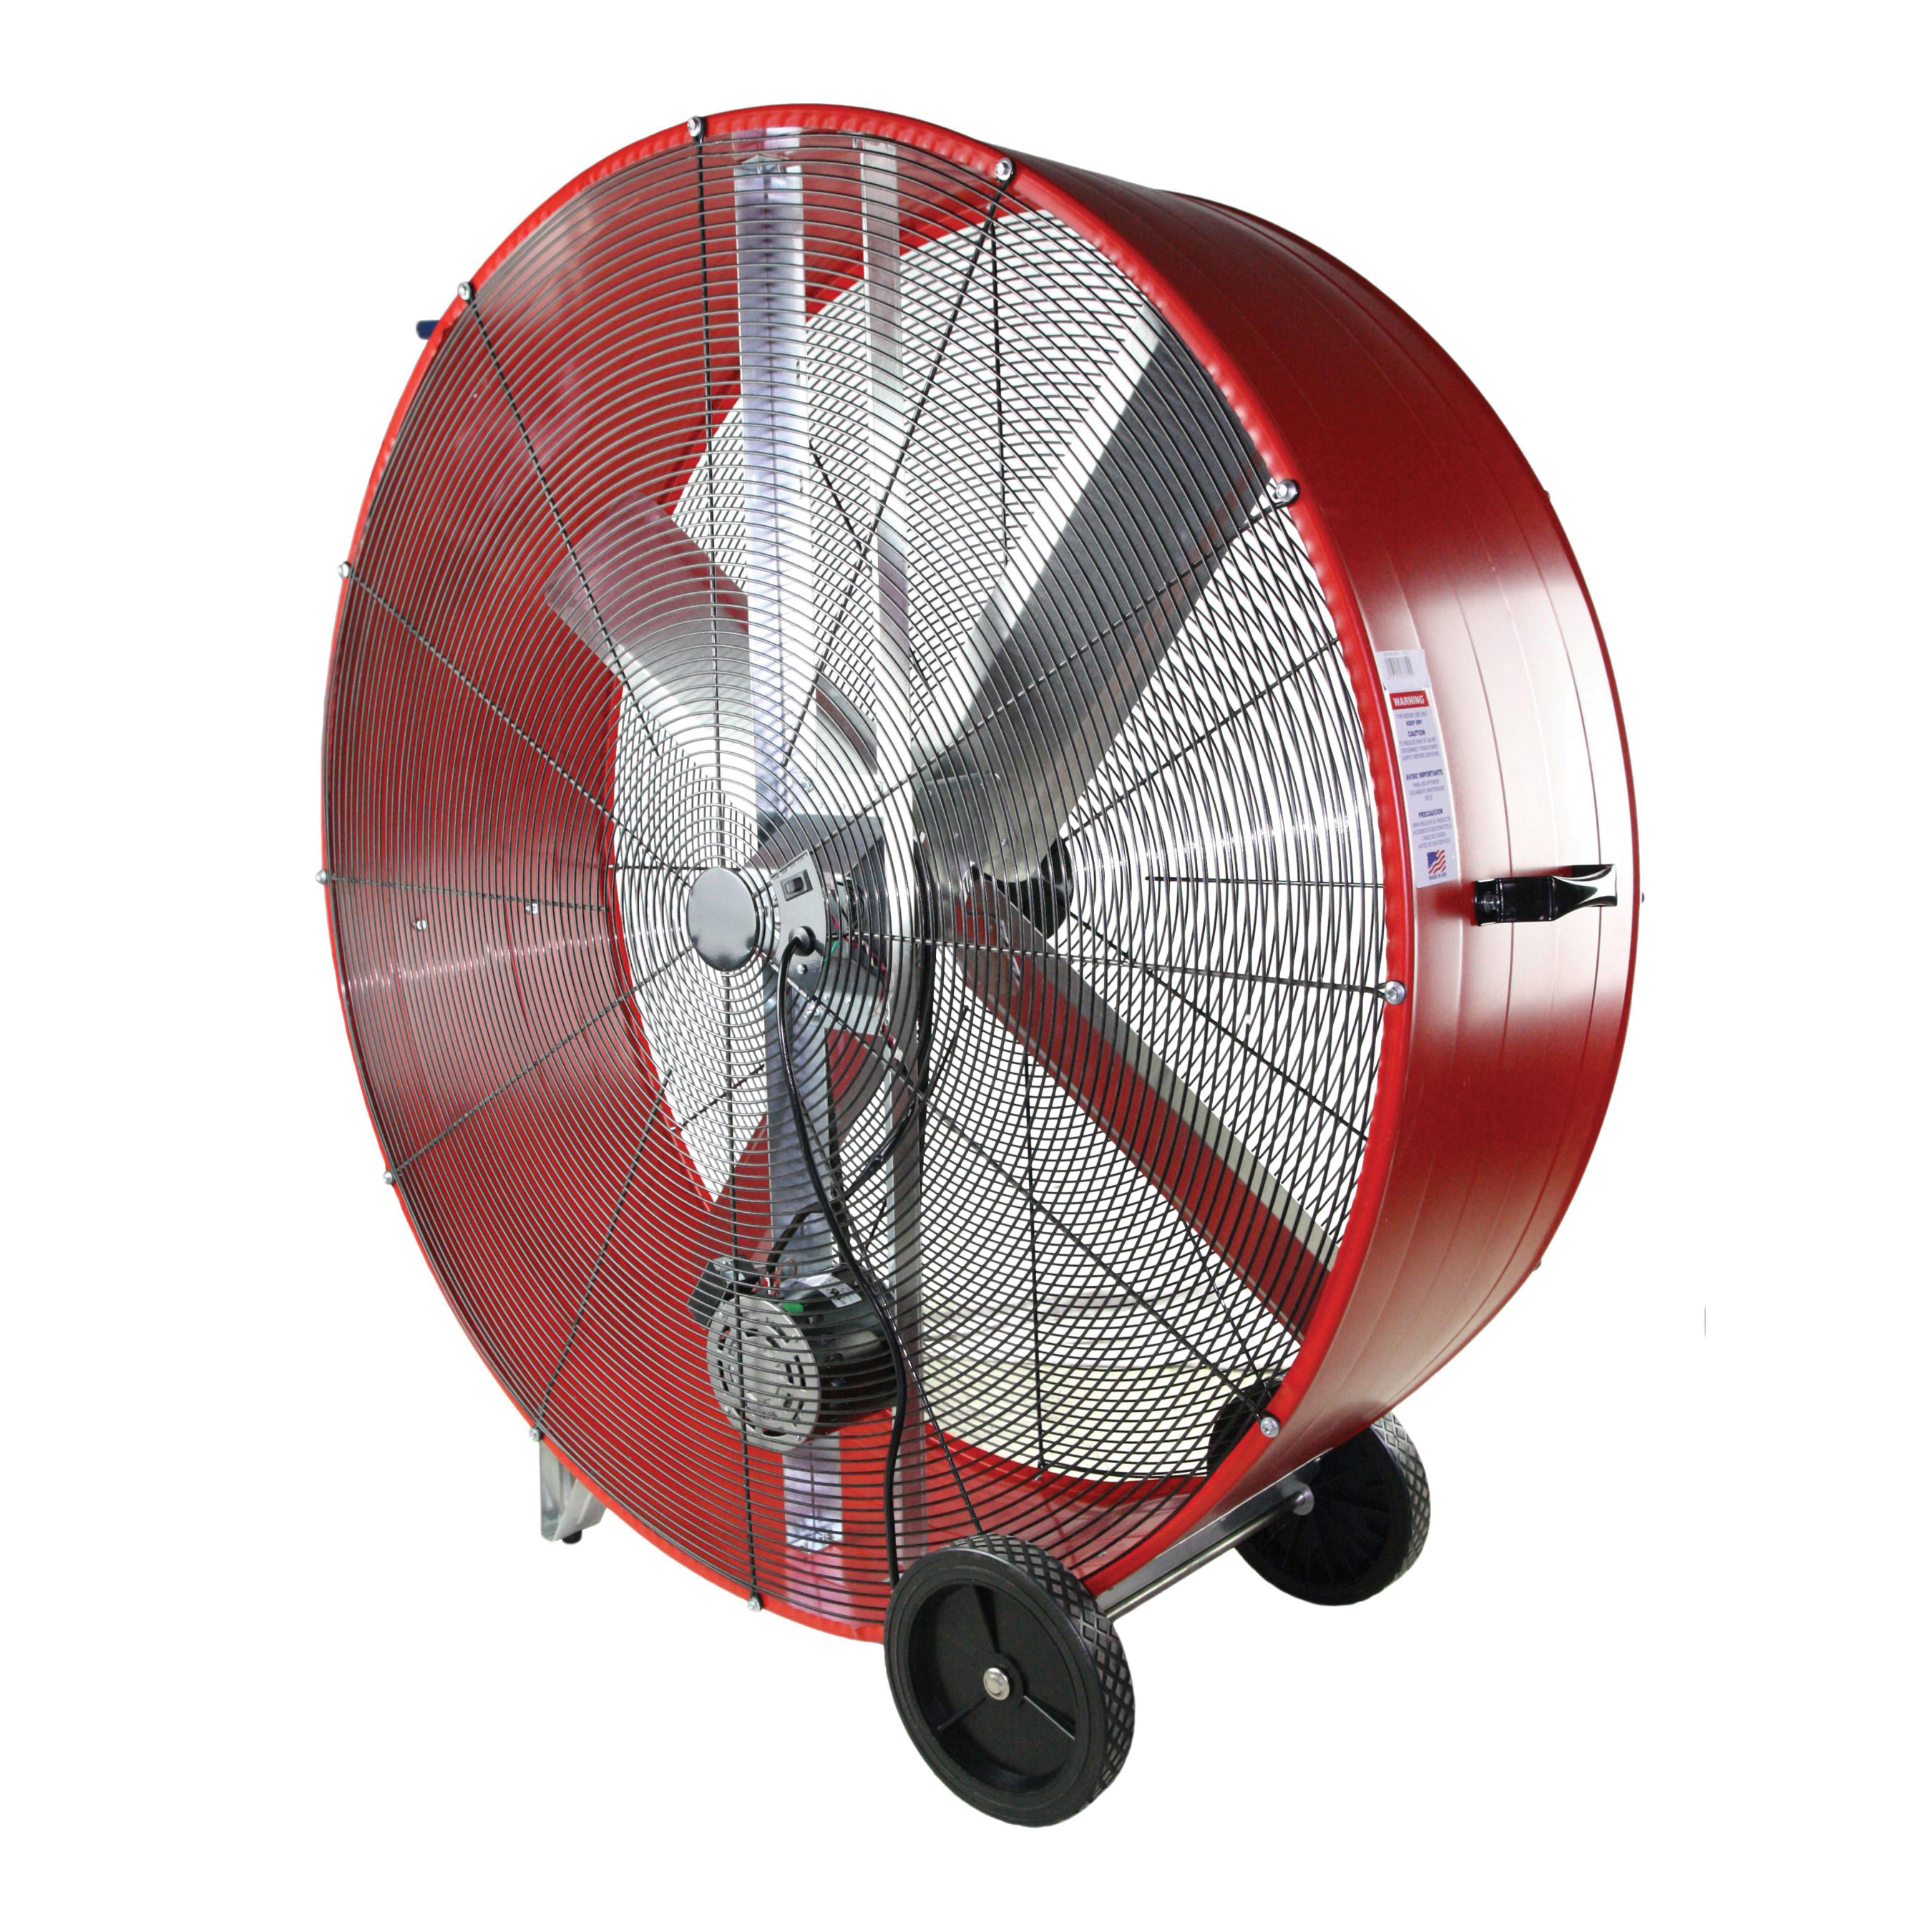 MaxxAir BF48BDRED Portable Drum Fan, 120 V, 2-Speed, 10,100 to 18,000 cfm Air, Black/Red - 3